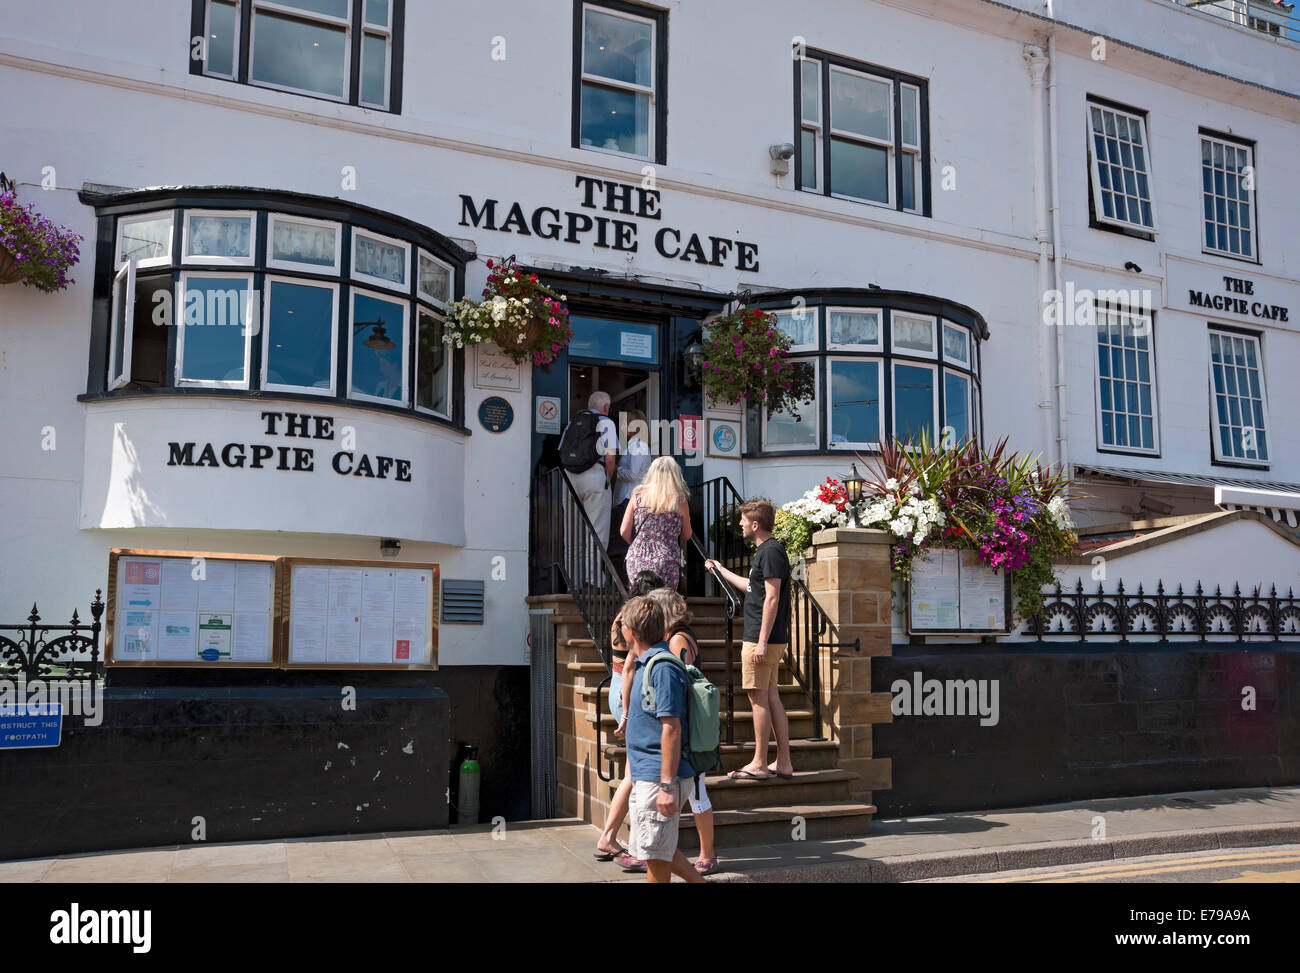 People visitors queuing outside the famous Magpie Cafe fish and chip restaurant in summer Whitby North Yorkshire England UK United Kingdom Britain Stock Photo